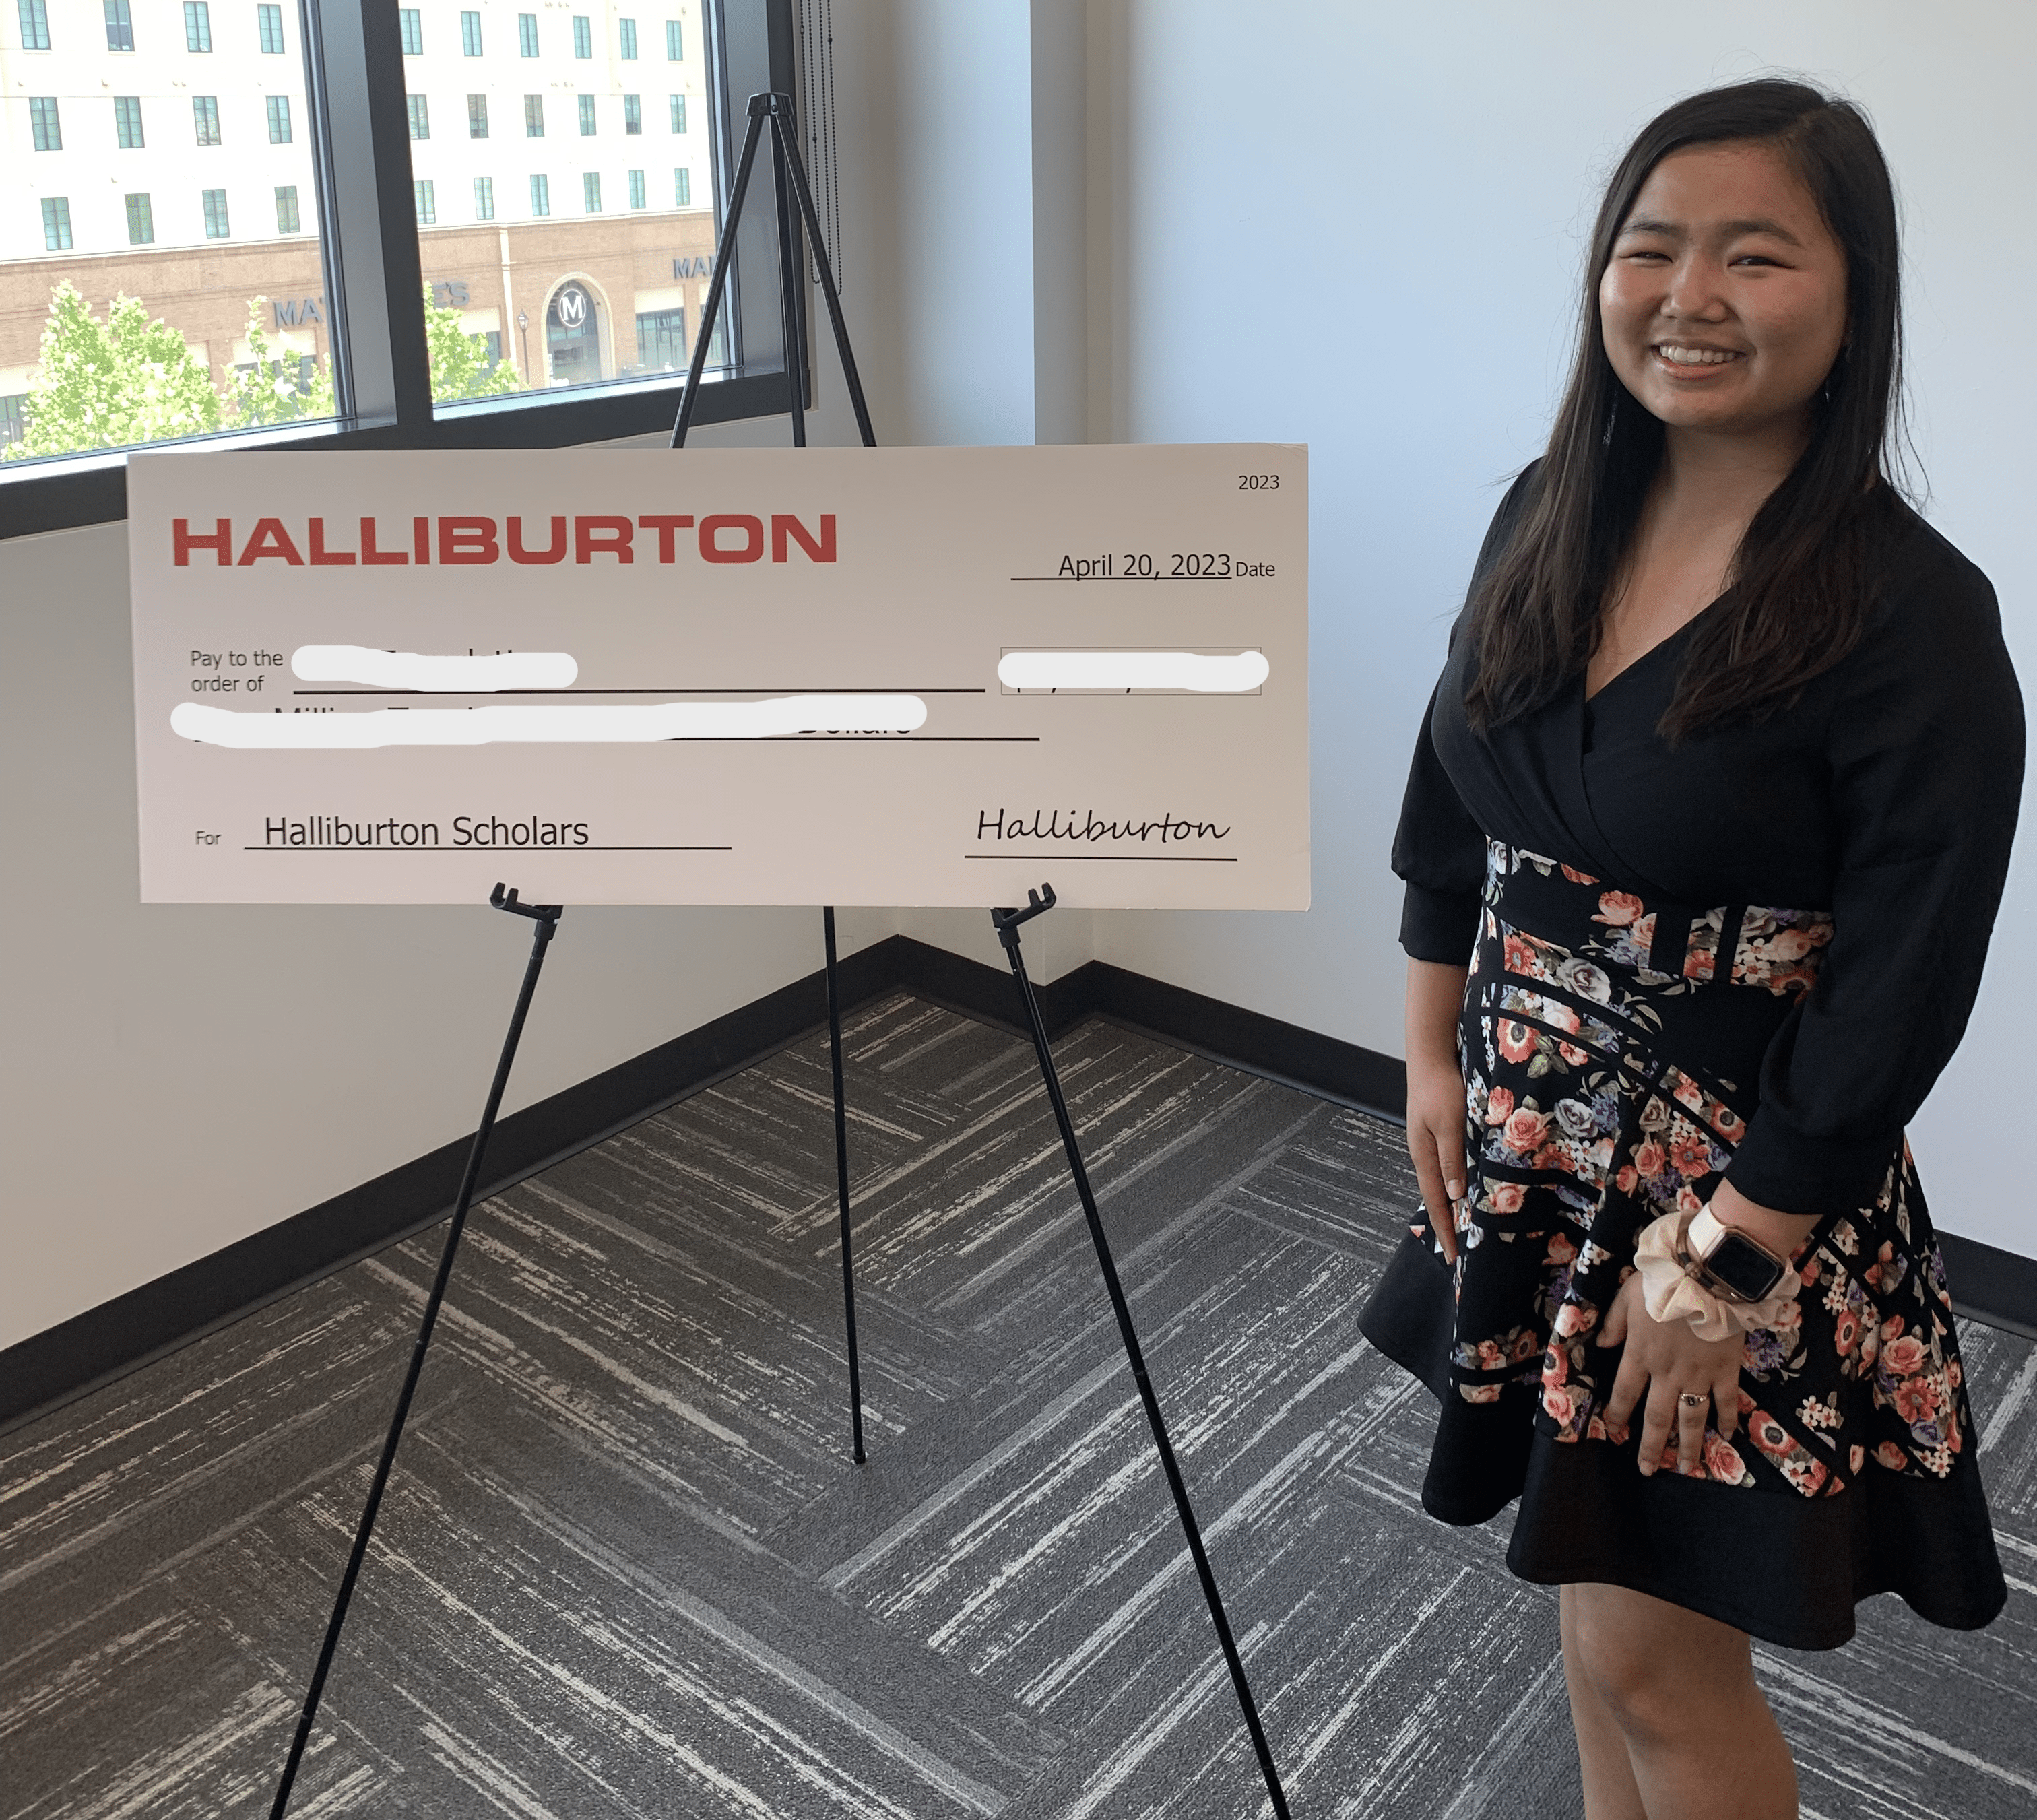 A photo of myself at the Halliburton Scholarship banquet in Spring 2023